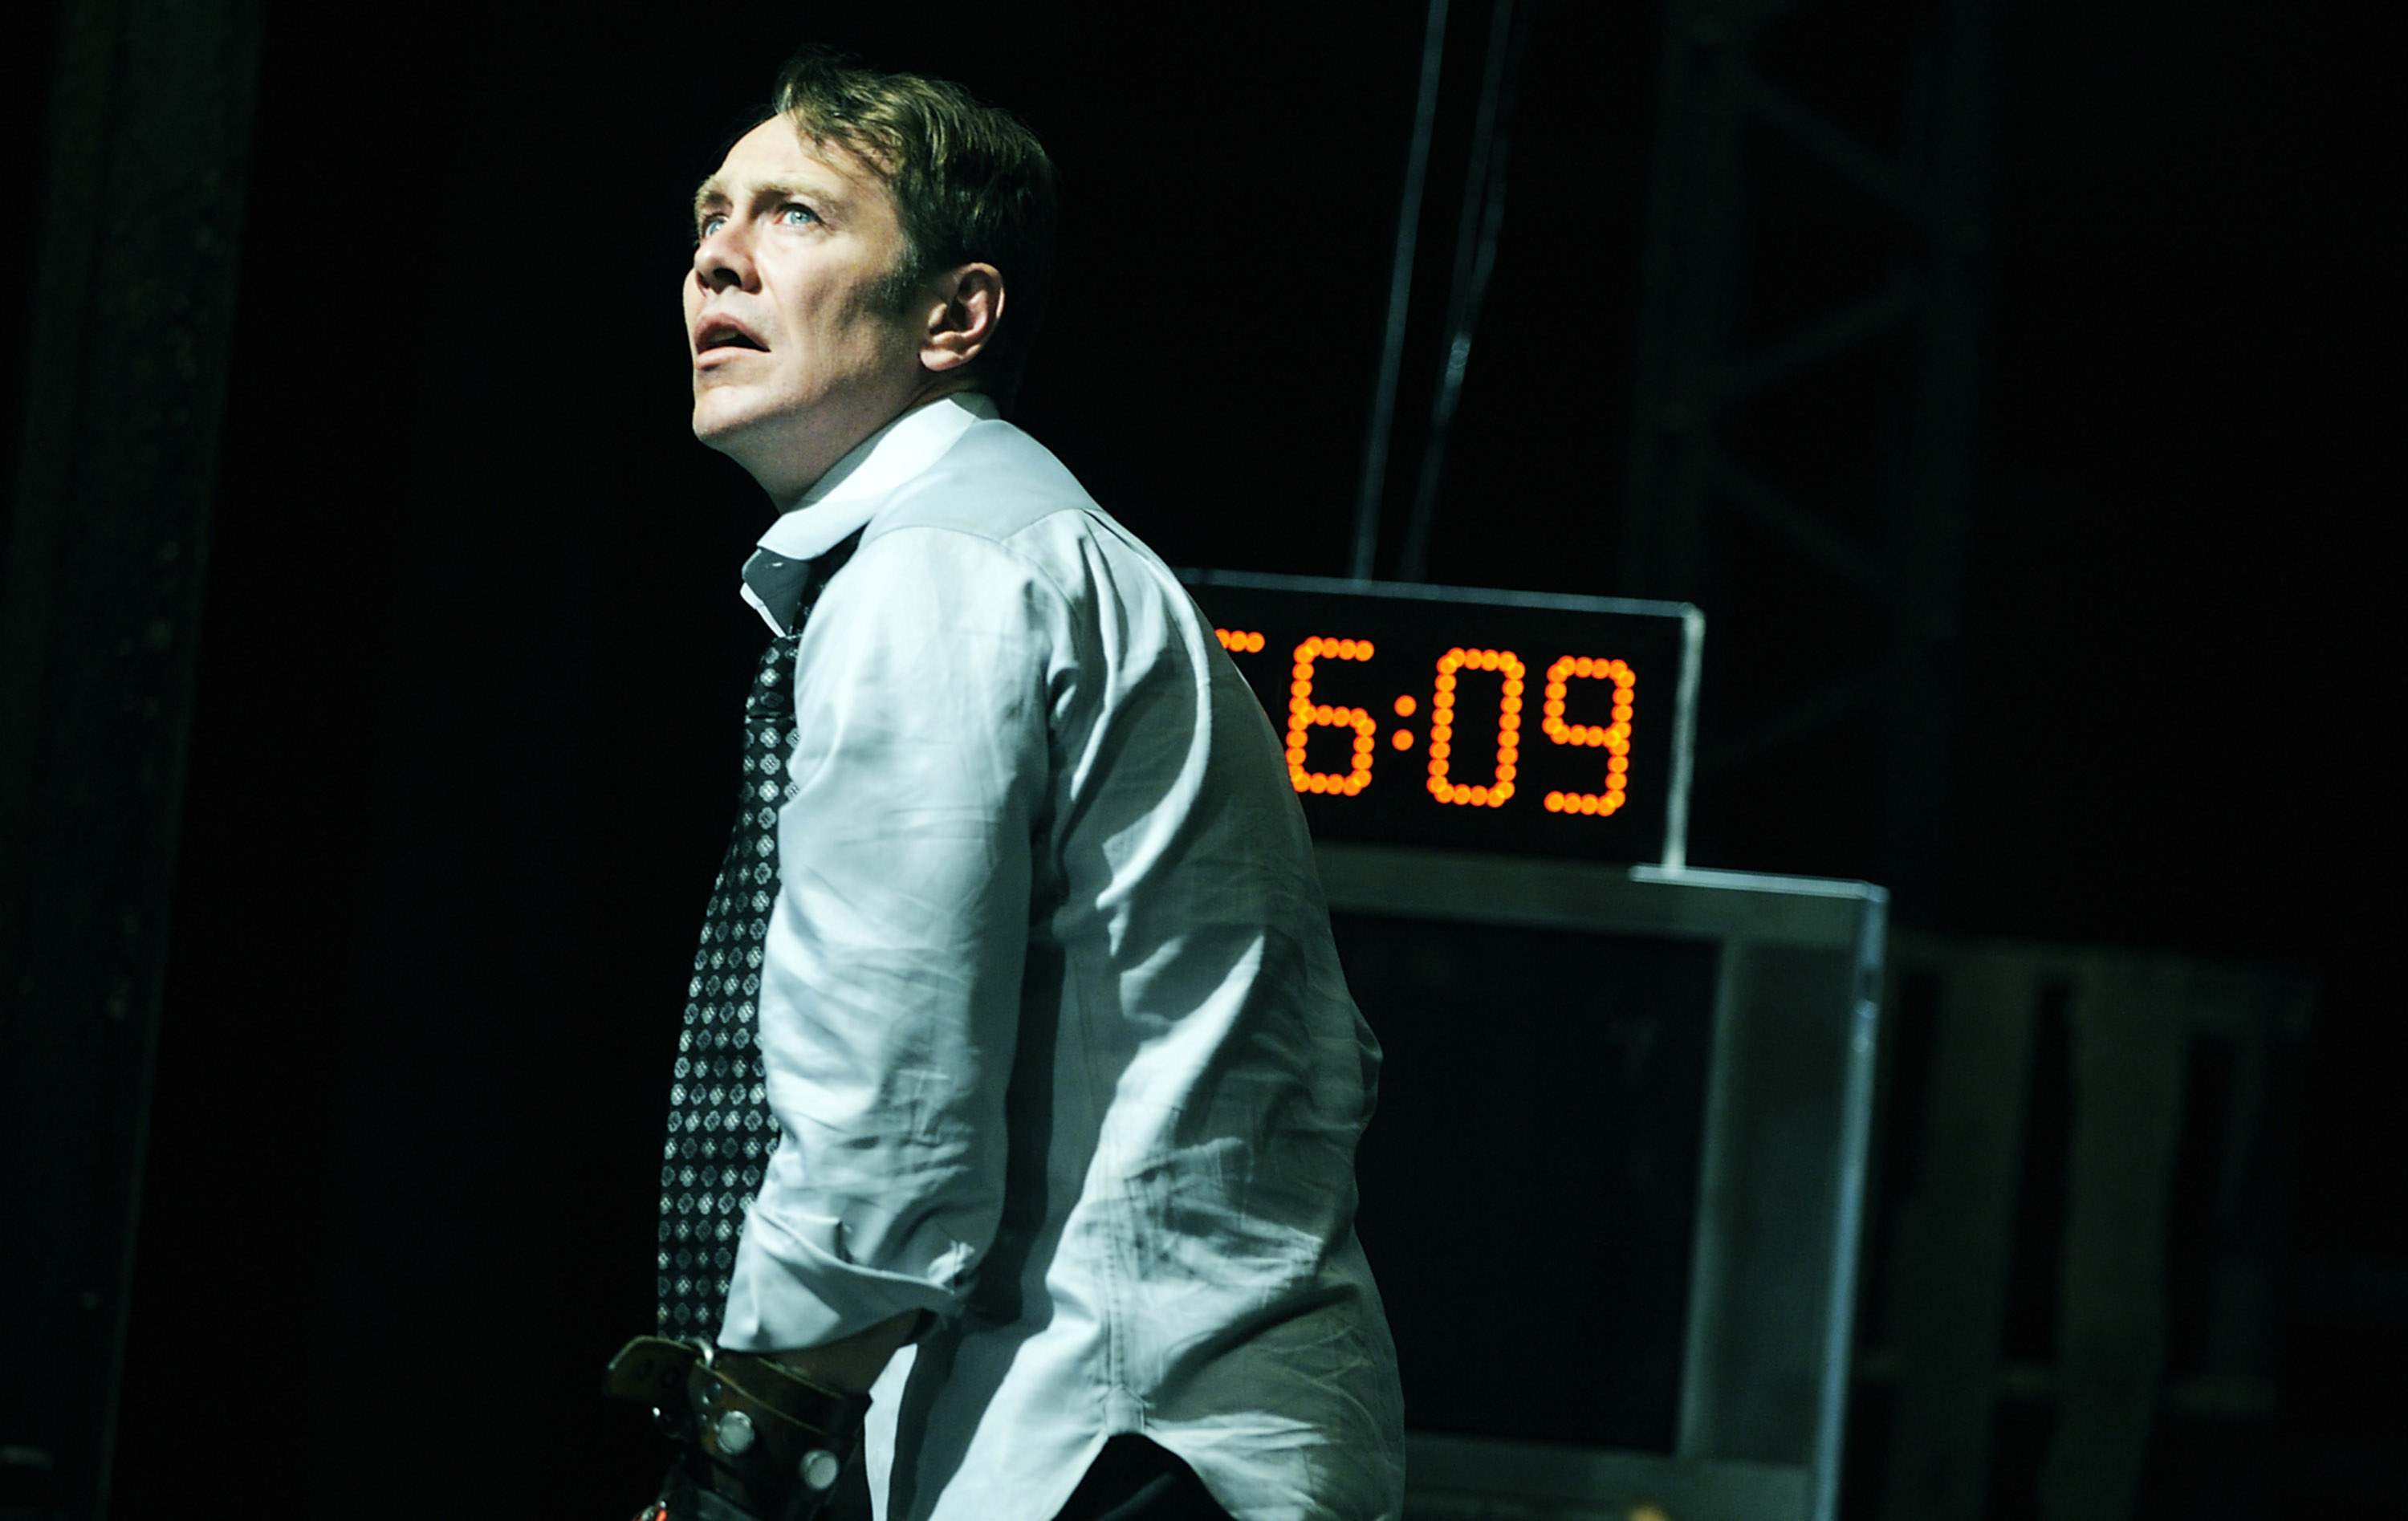 A repentant insurance executive attempts to analyze a trap in &quot;Saw VI&quot;